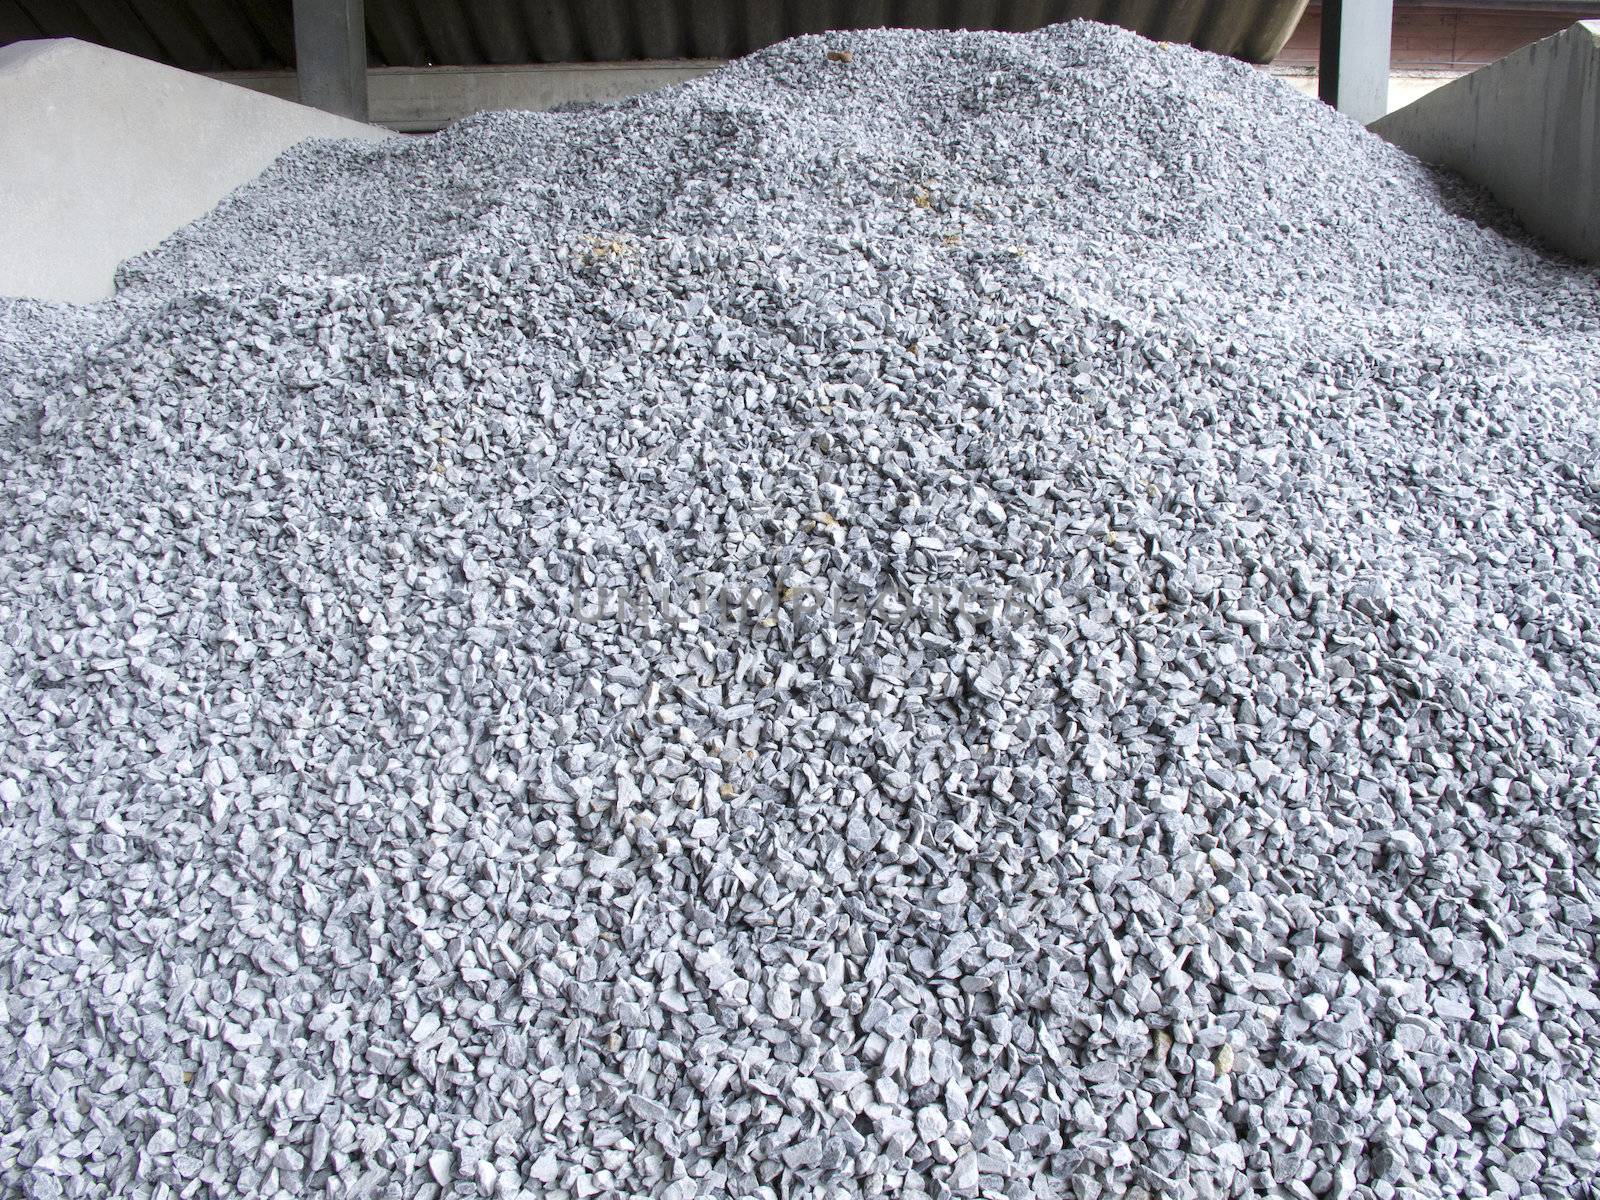 Pile of construction gravel in store